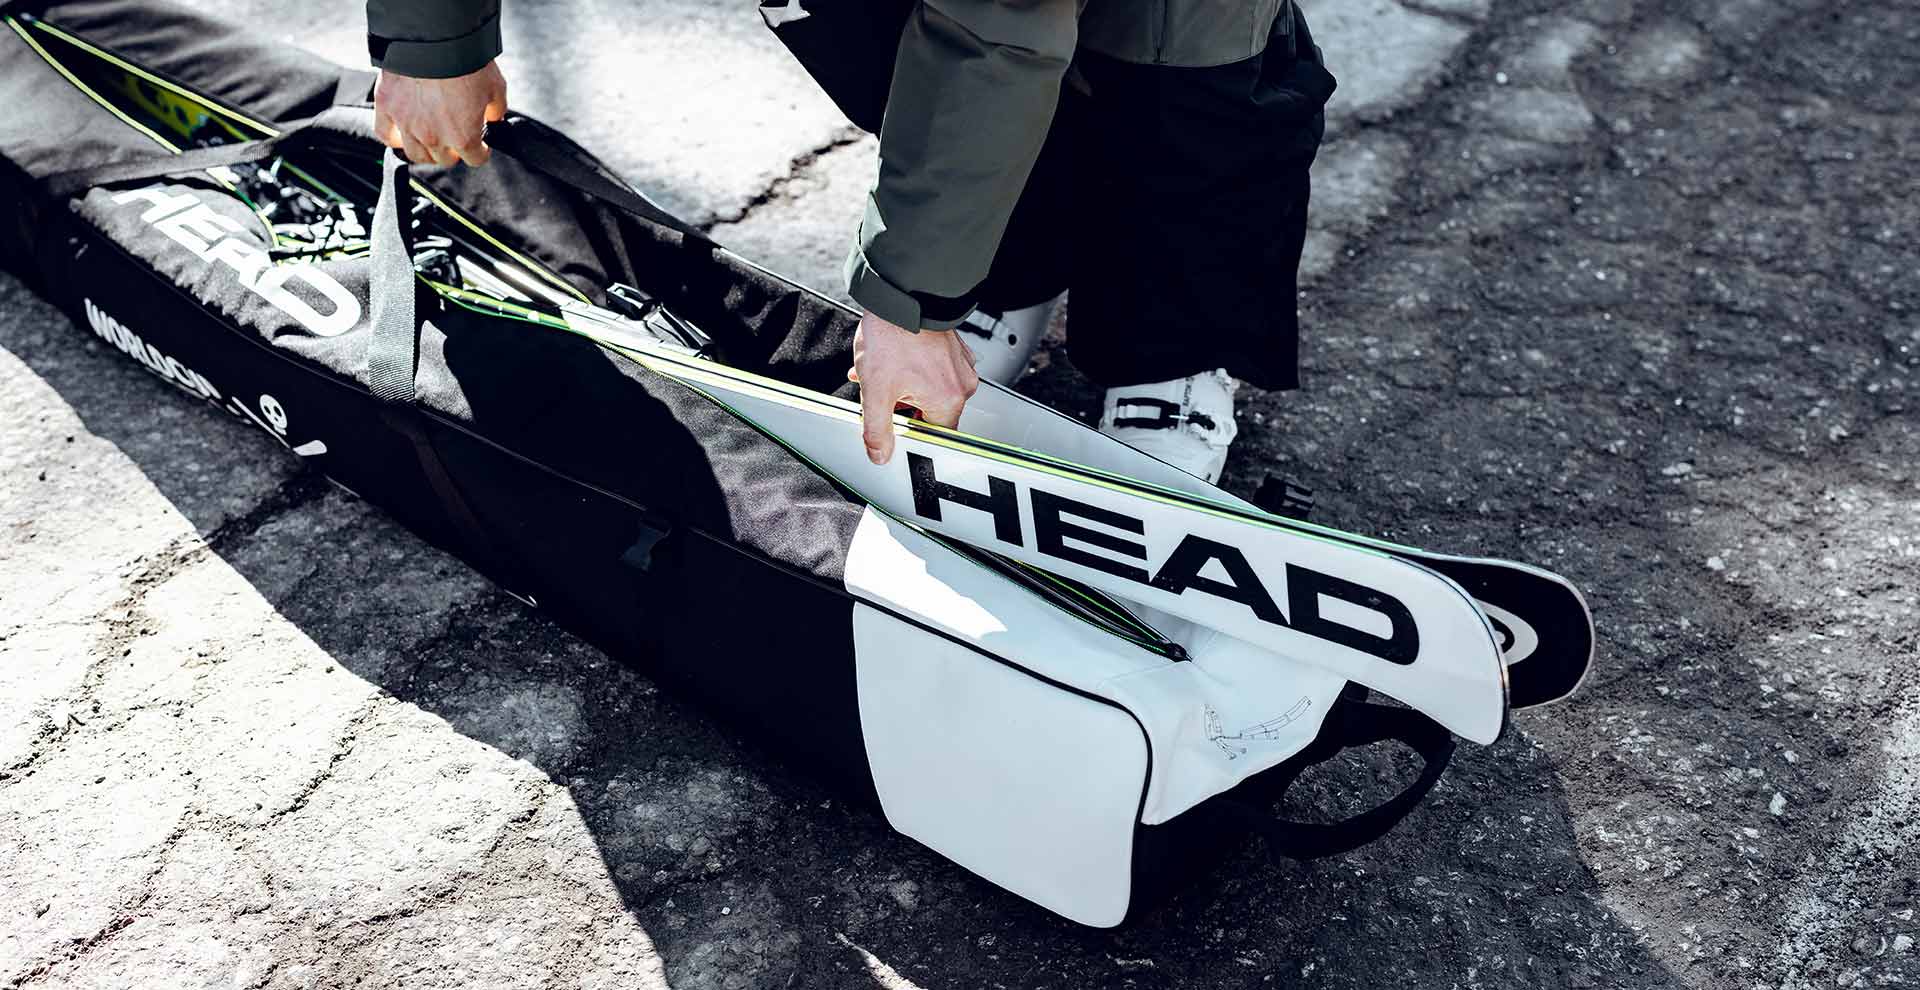 How to store ski gear at the end of the season